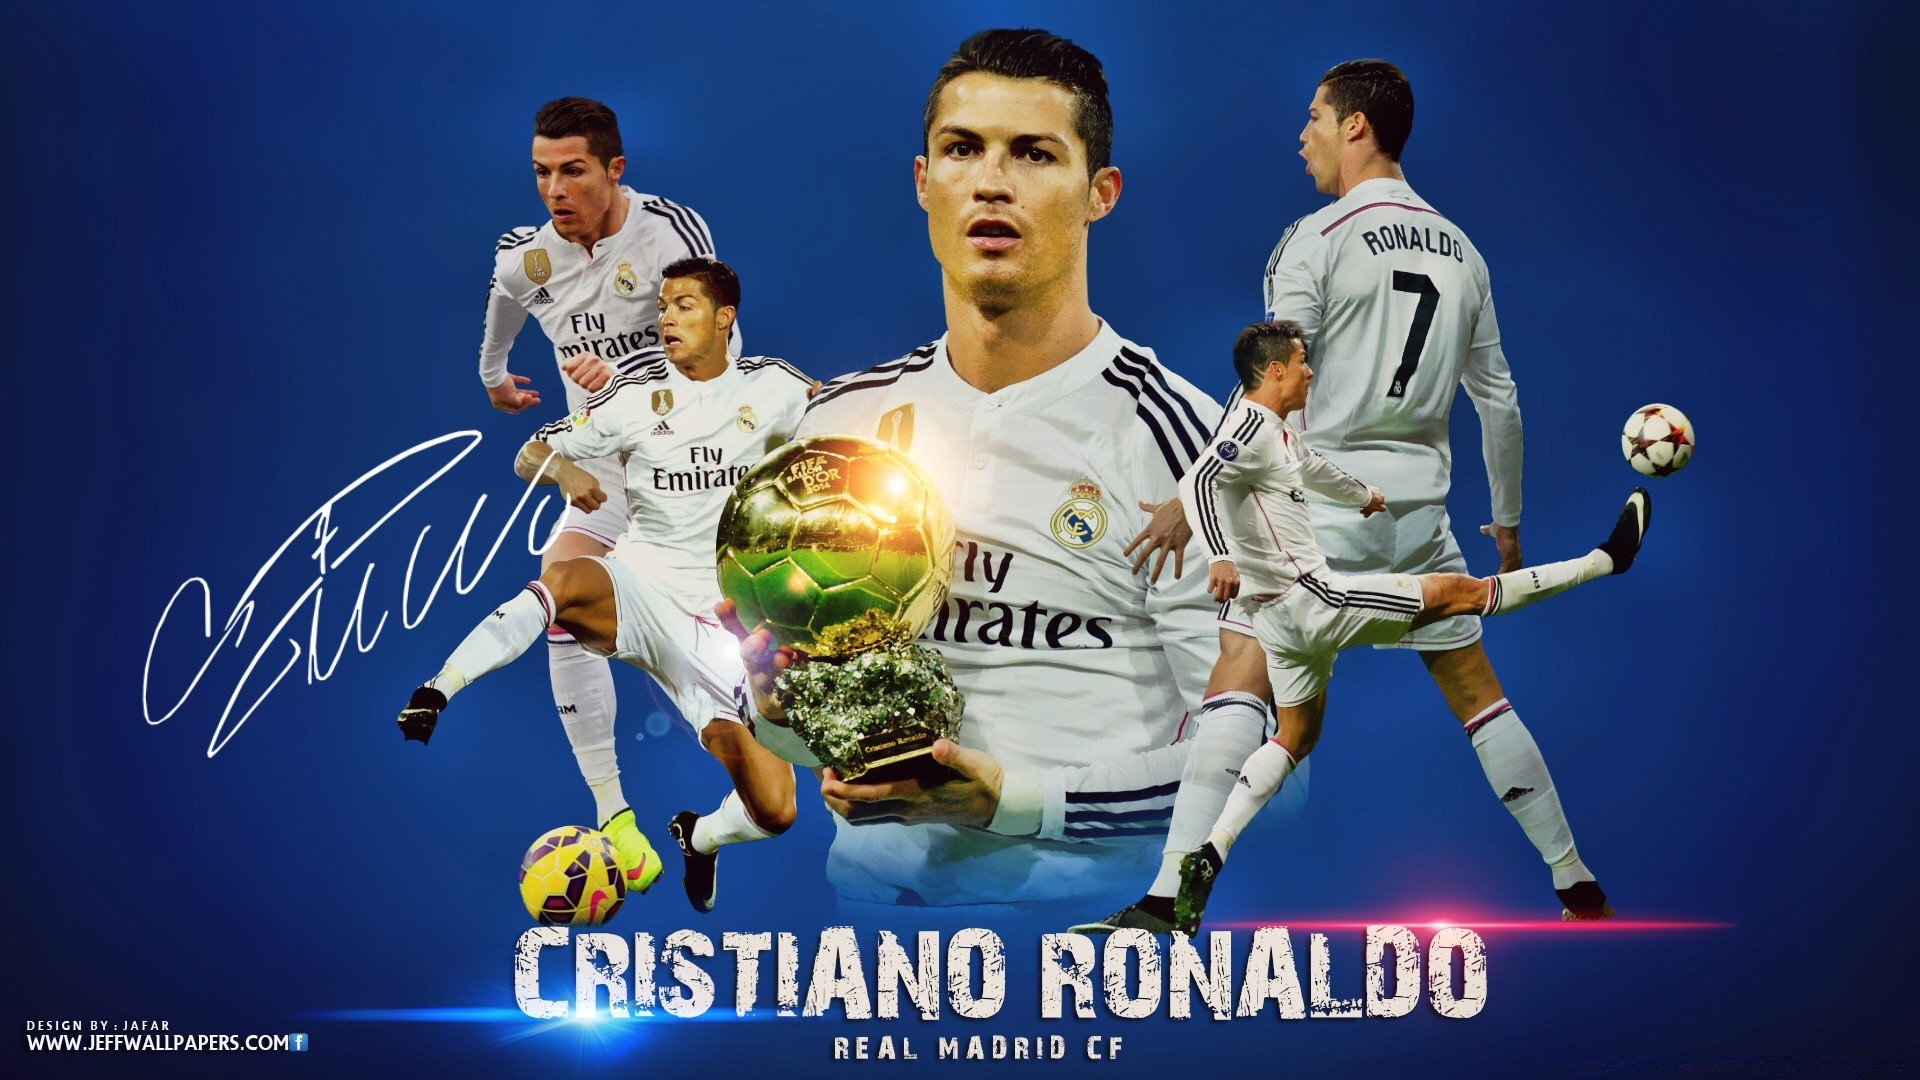 Football Adult Man Soccer Motion Competition - Cristiano Ronaldo Real Madrid 2015 - HD Wallpaper 